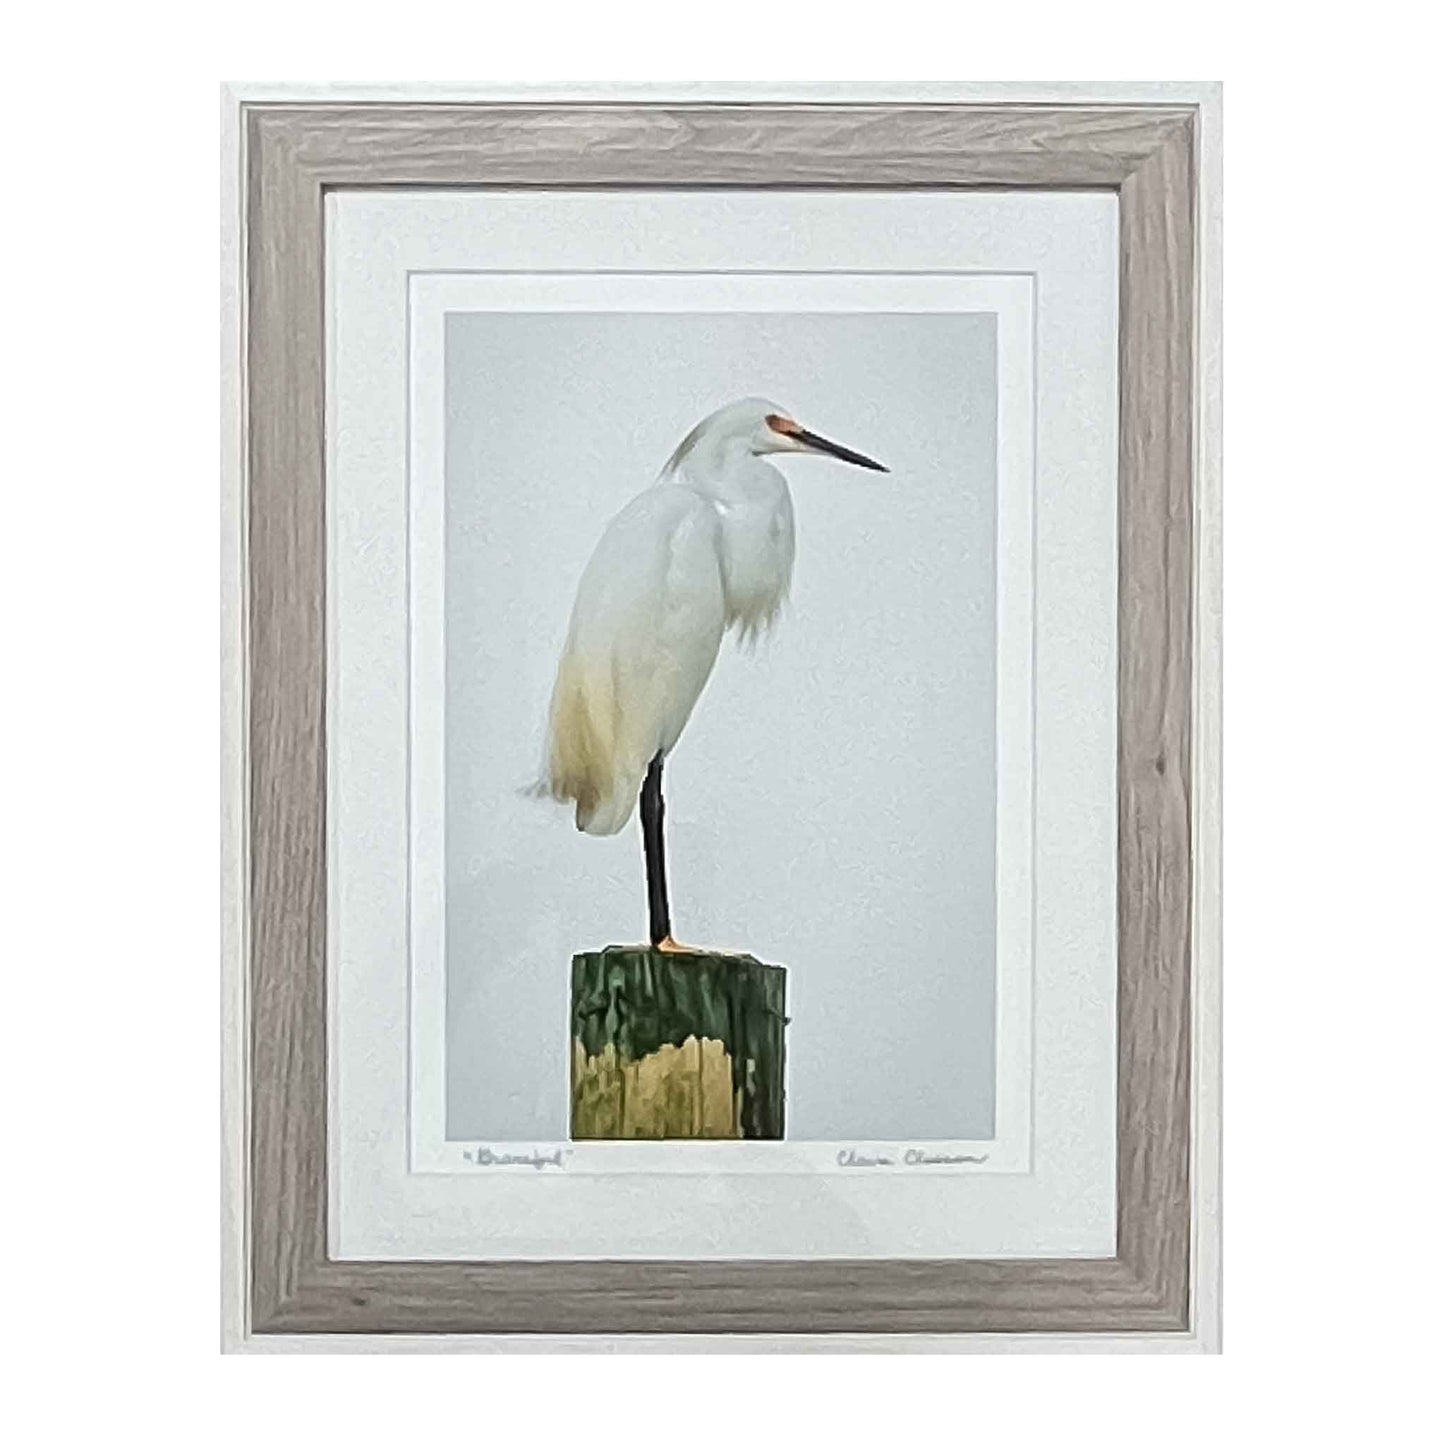 ECC “Graceful” Framed Photographic Print By Photographer Claire Closson. Great Snowy Egret photographic print. Wild Bird photograph, While plumage with yellow and gray tints, Perched atop a weathered piling, Magestic and graceful, on a white background. In a white and gray frame, under glass.